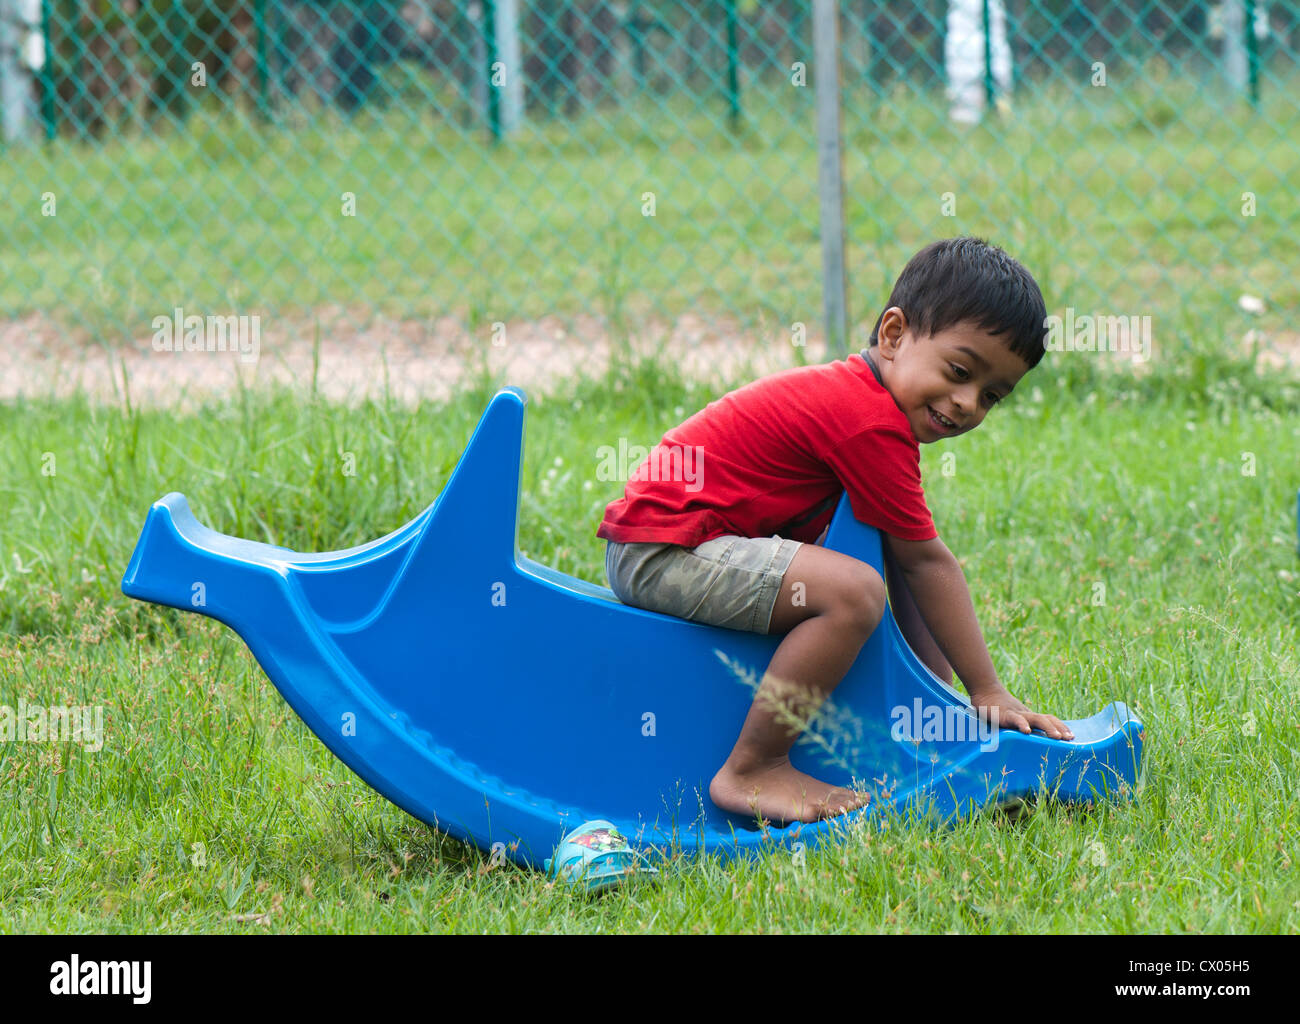 Toddler playing alone in seesaw in a park, India Stock Photo